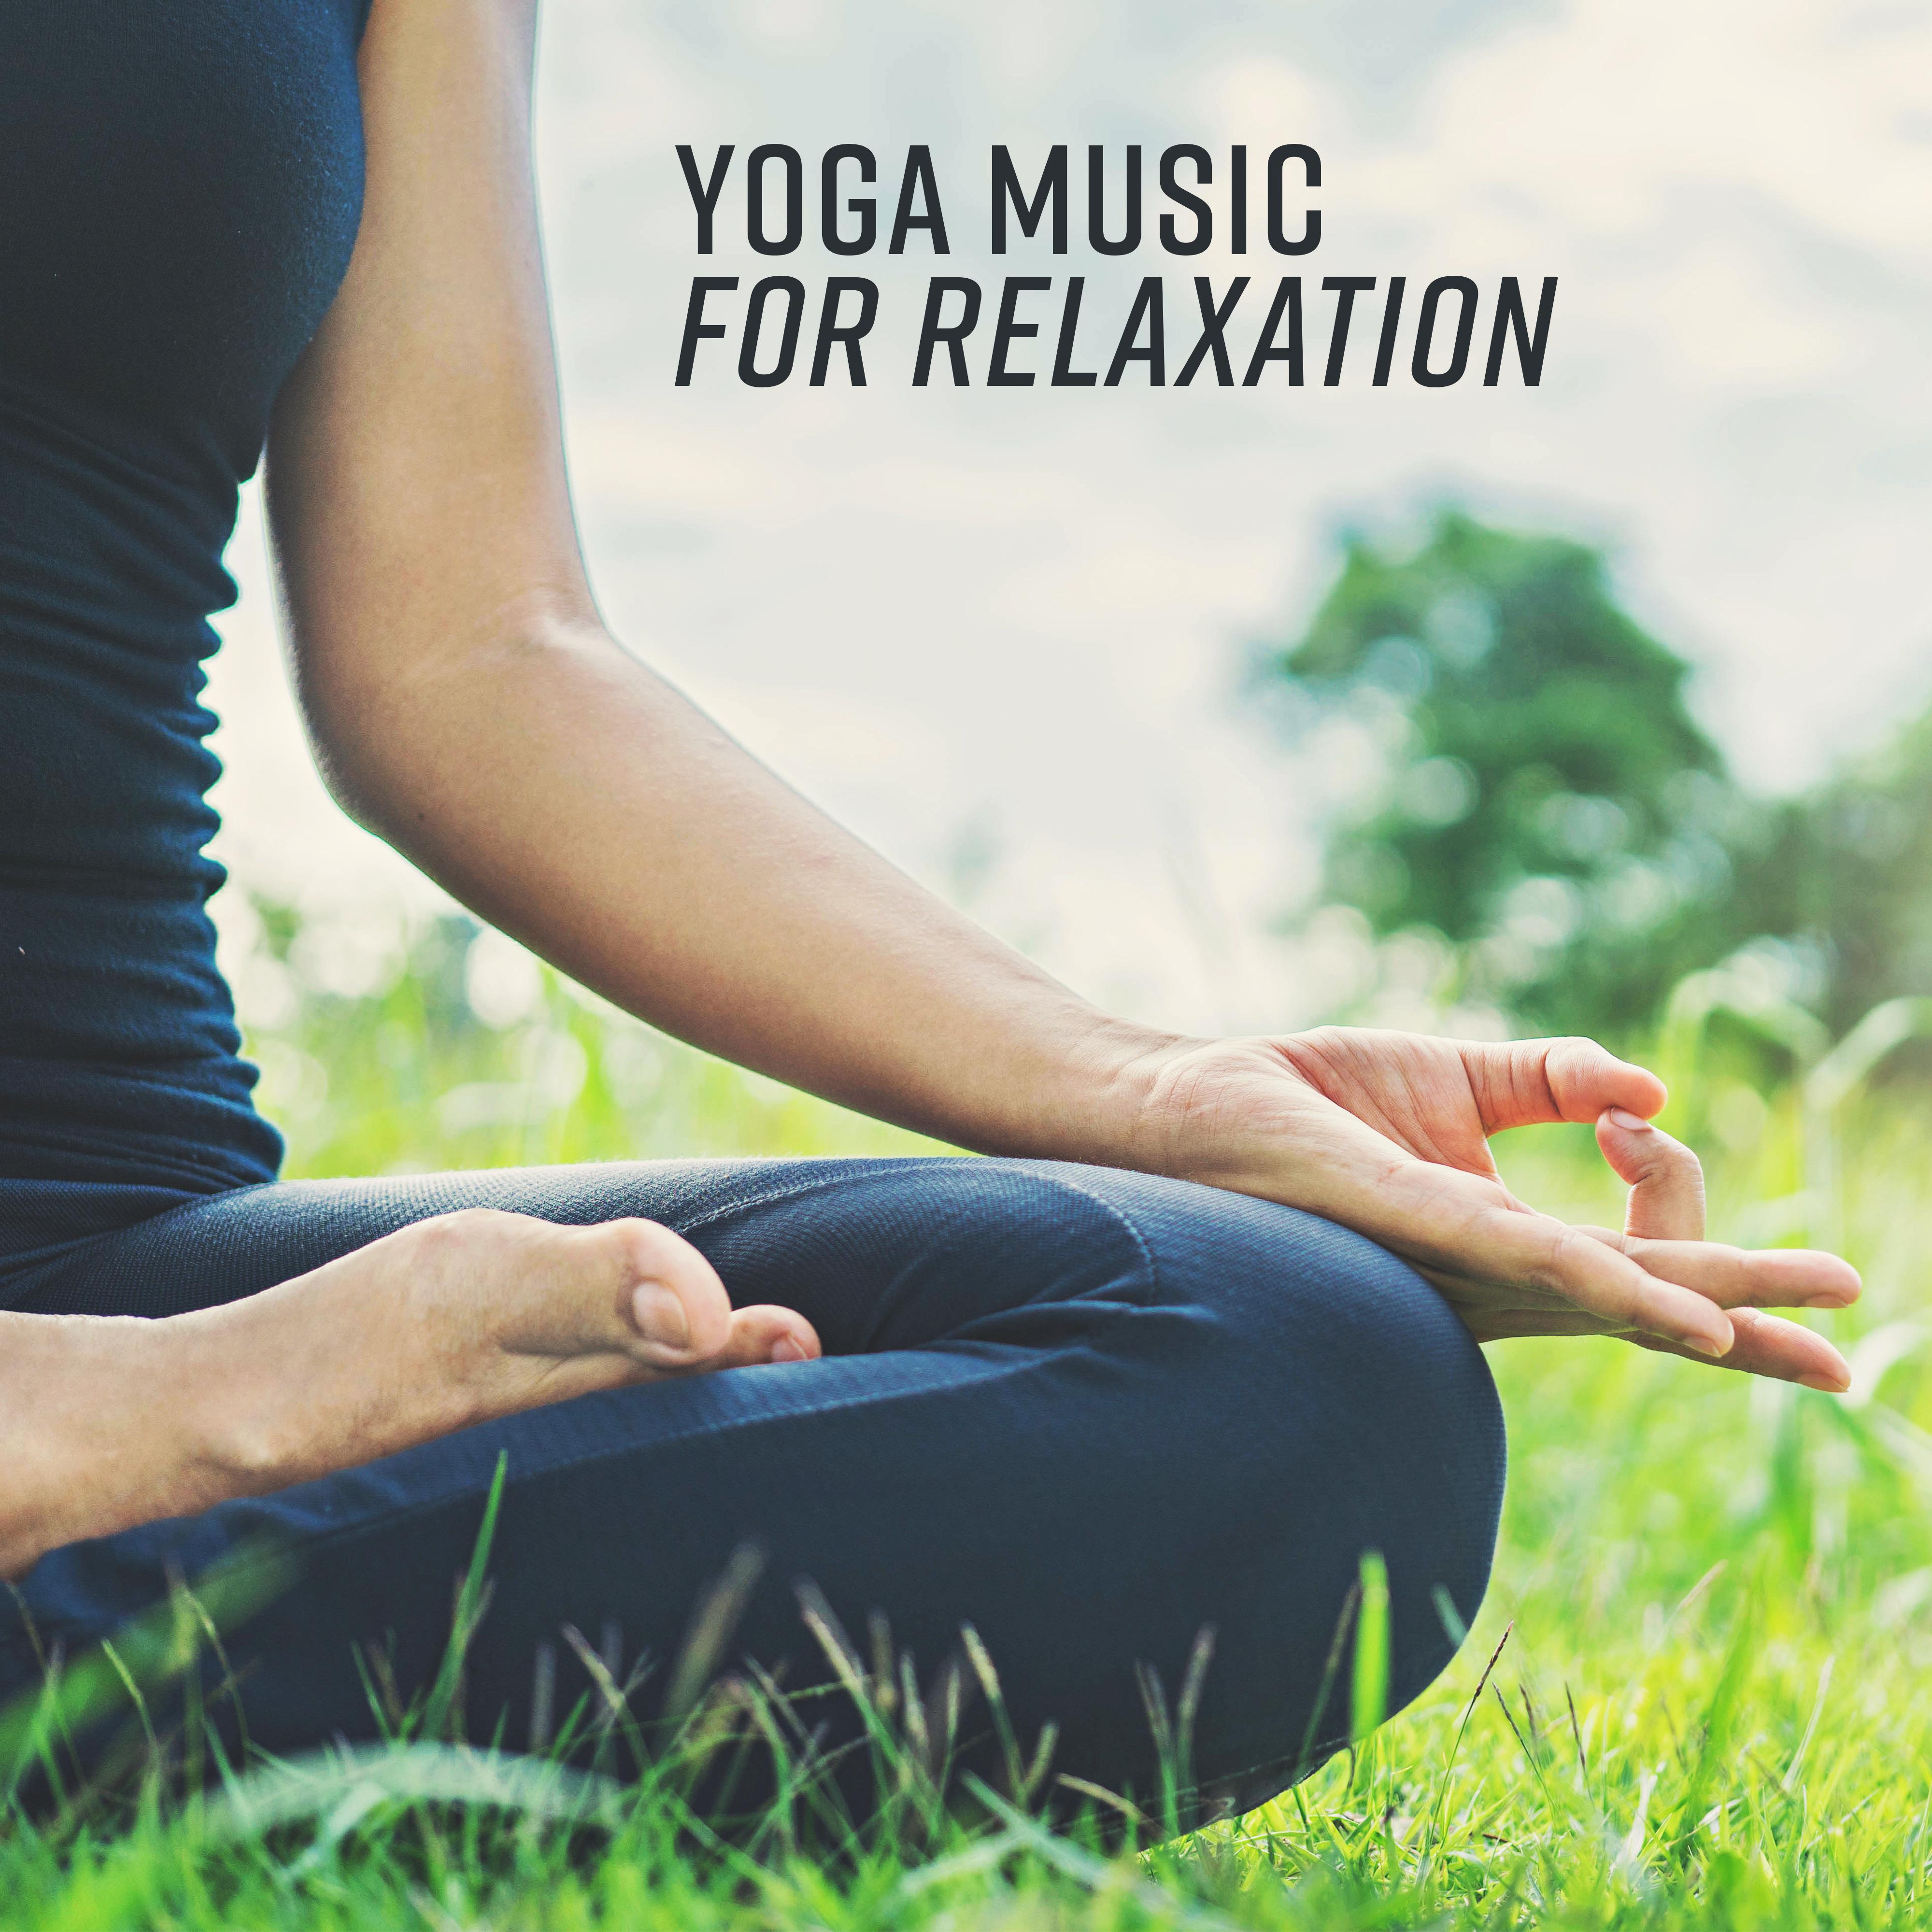 Yoga Music for Relaxation